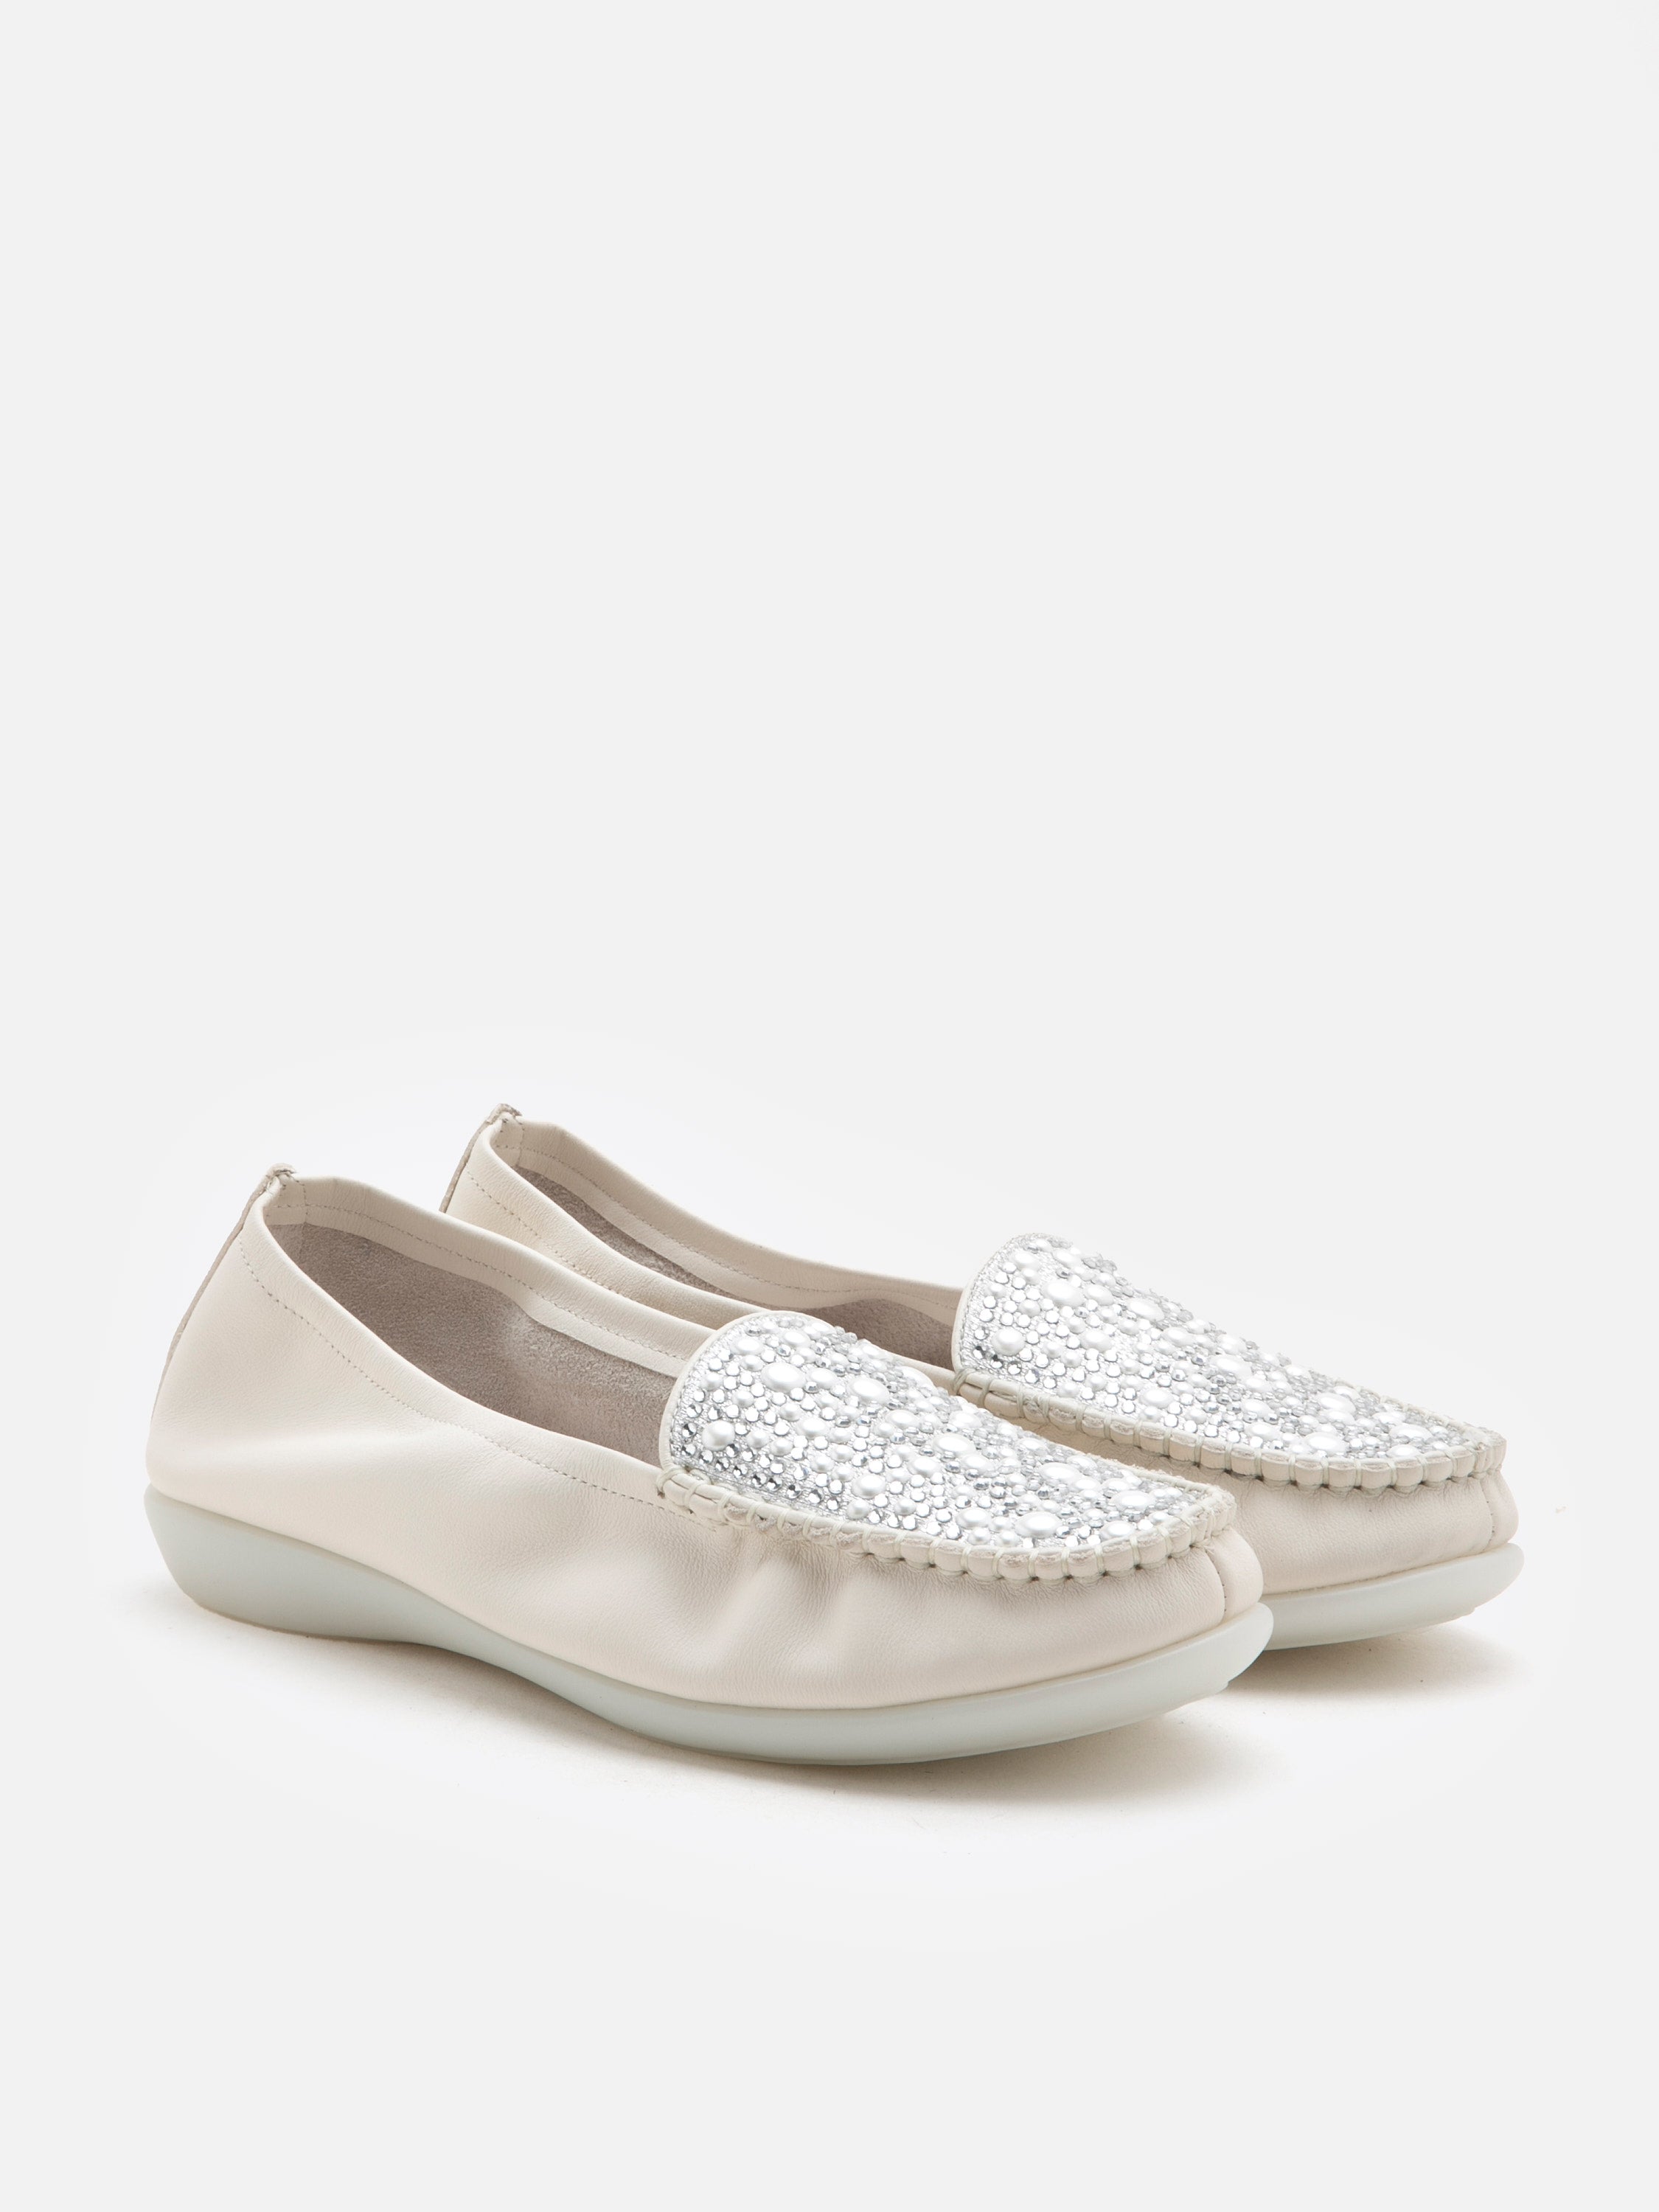 PAZZION, Molly Pearl Moccasins, Beige